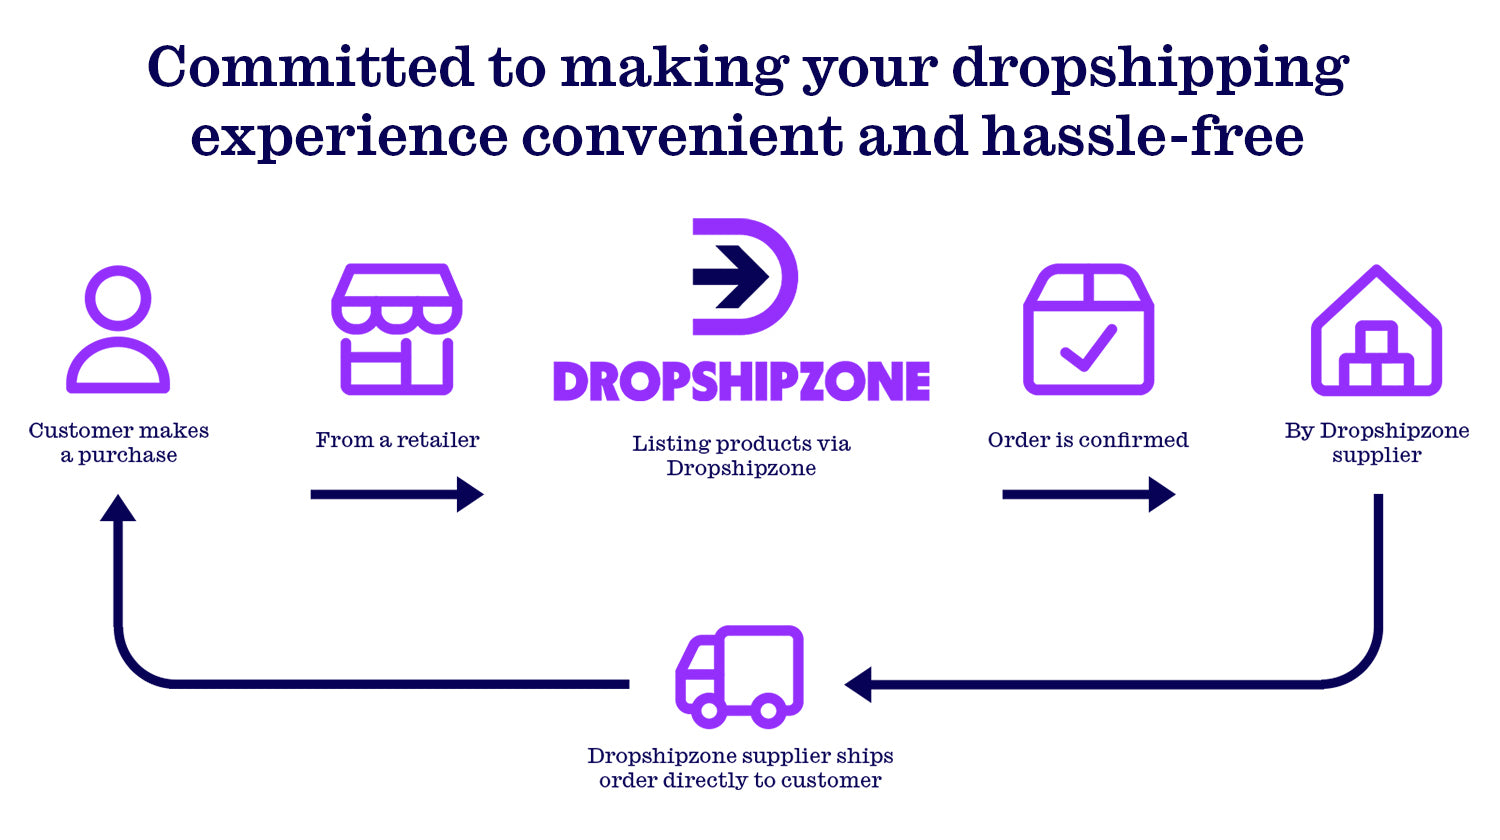 Dropshipzone is your answer to hassle-free dropshipping with reliable suppliers.